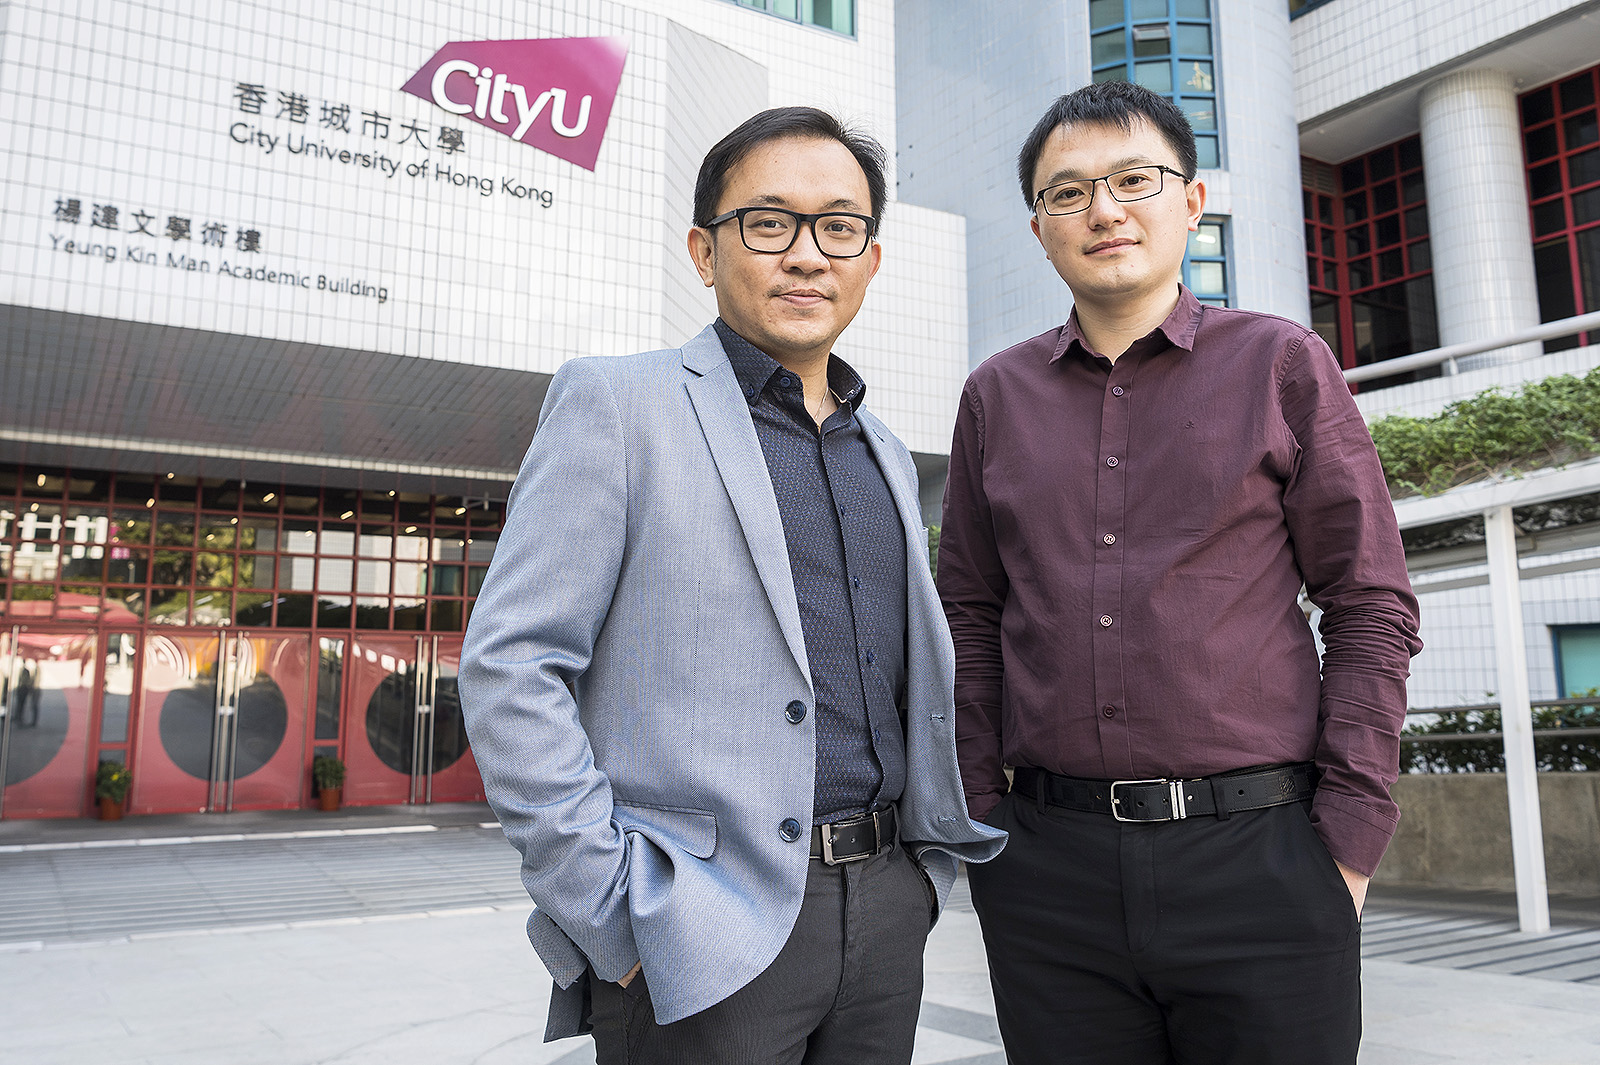 (From left) Dr Ng Yun-hau and Dr Shang Jin have developed new technologies for generating sustainable energy and mitigating air pollution. 